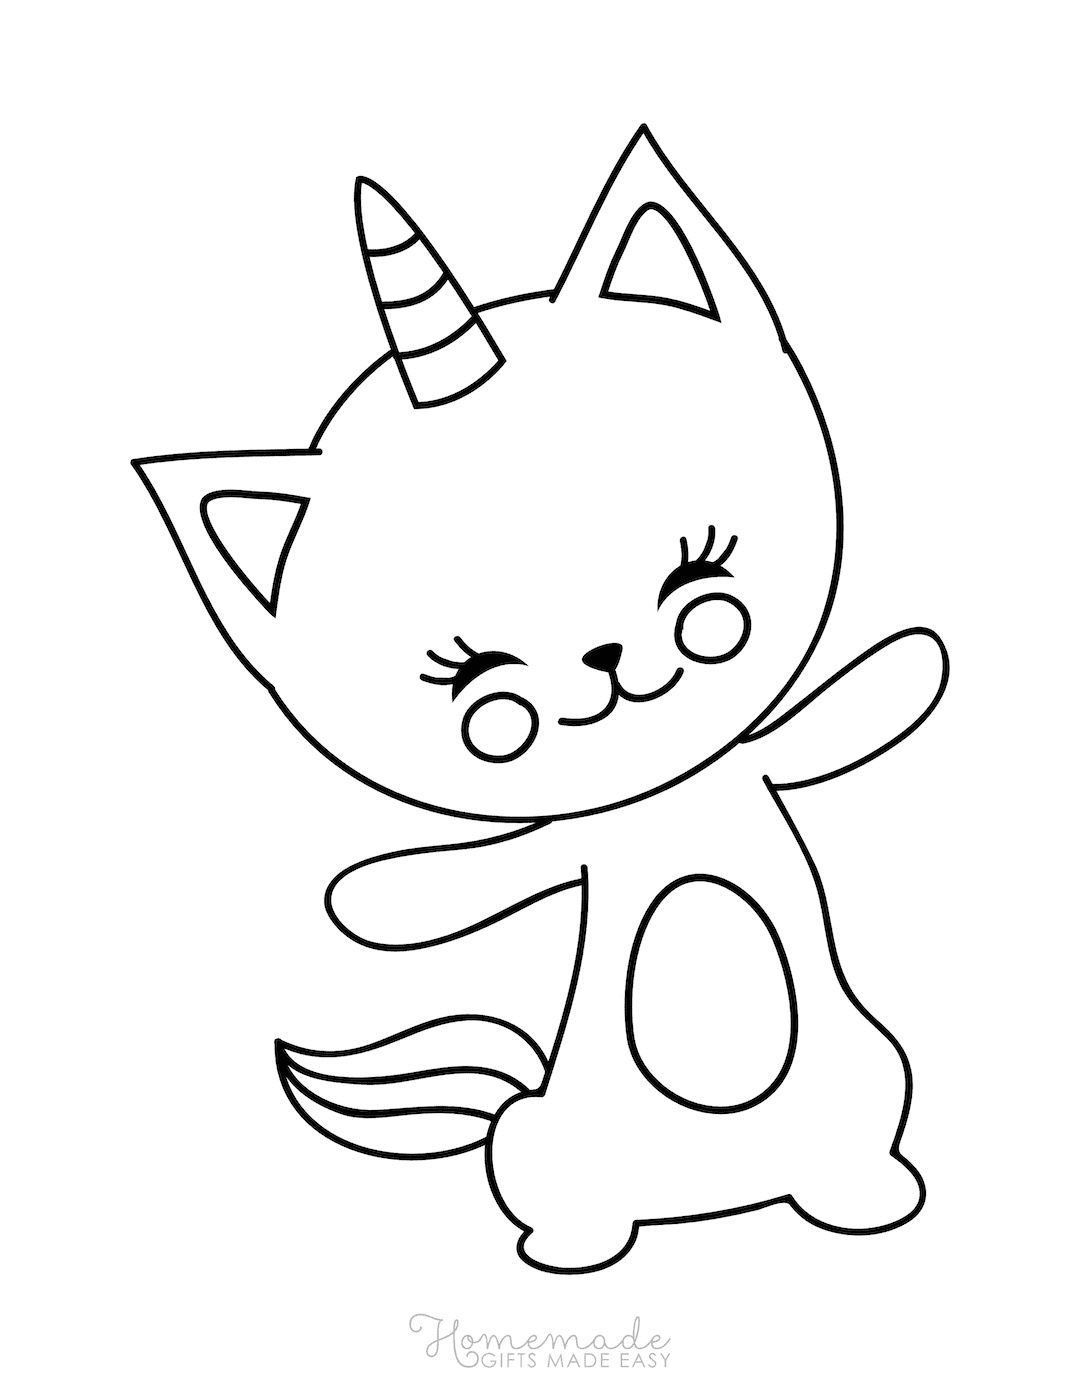 Coloring Pages For Kids Unicorn Kitty Kitty Unicorn Outlined For
Coloring Book Isolated Vector Image